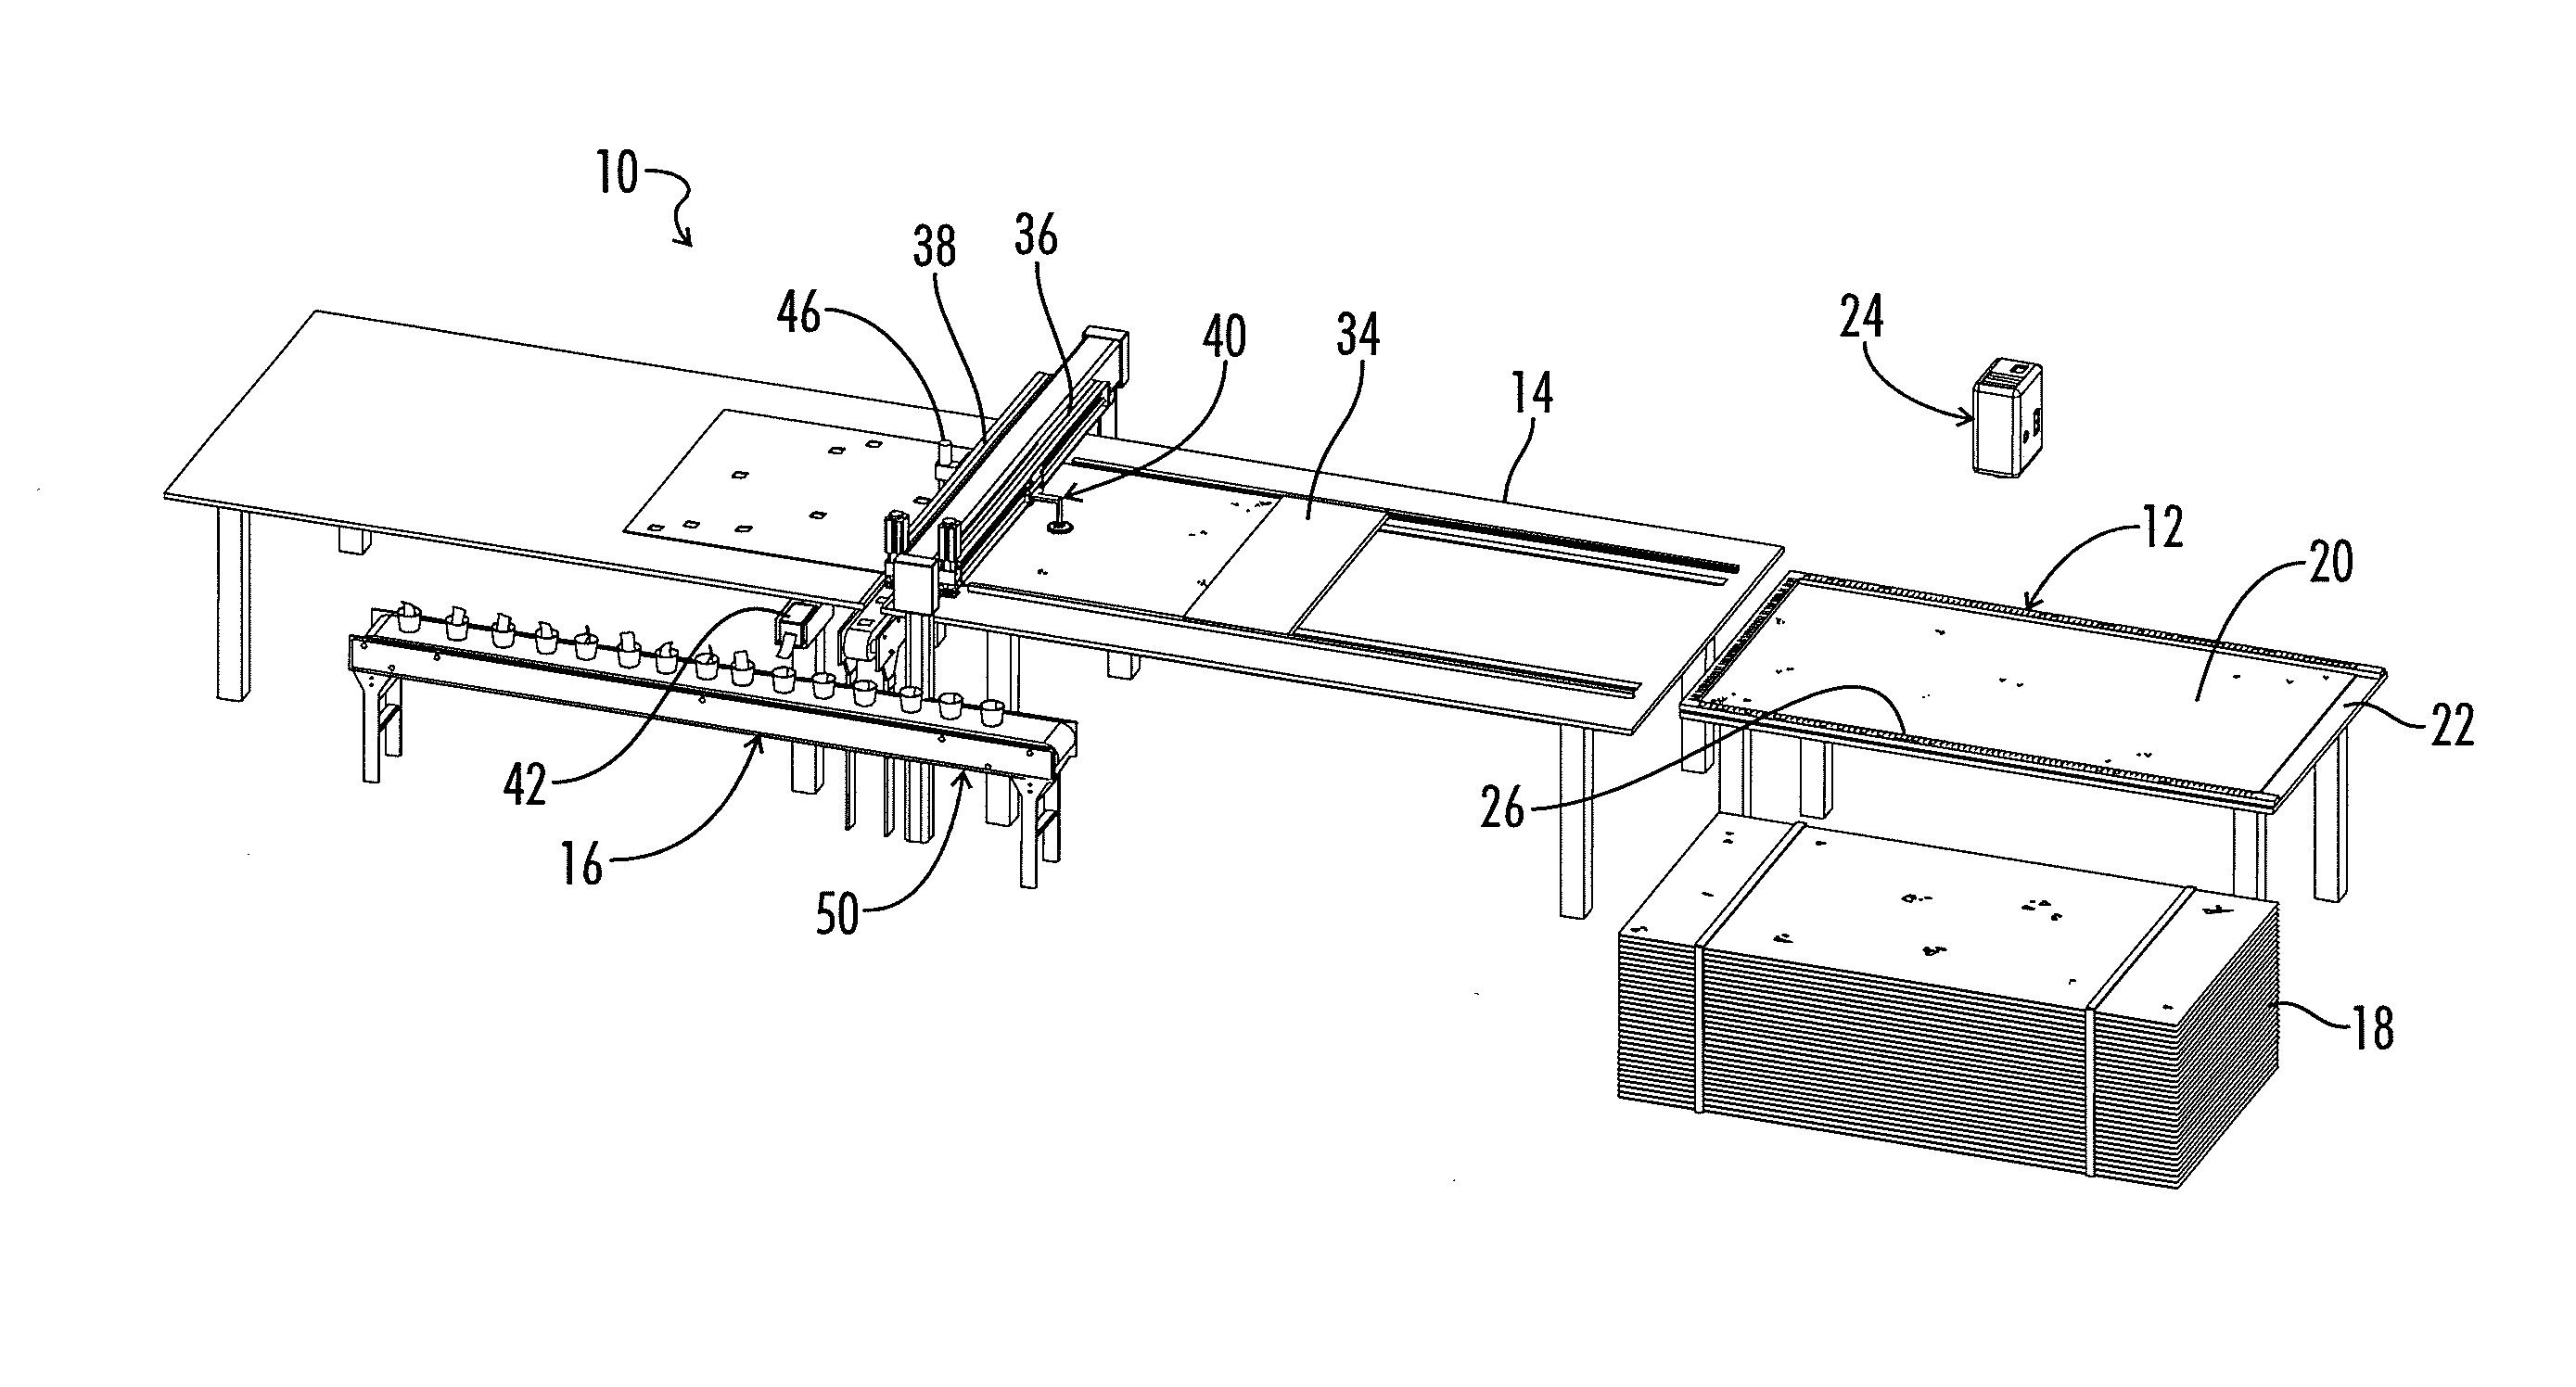 Automated Fragment Collection Apparatus